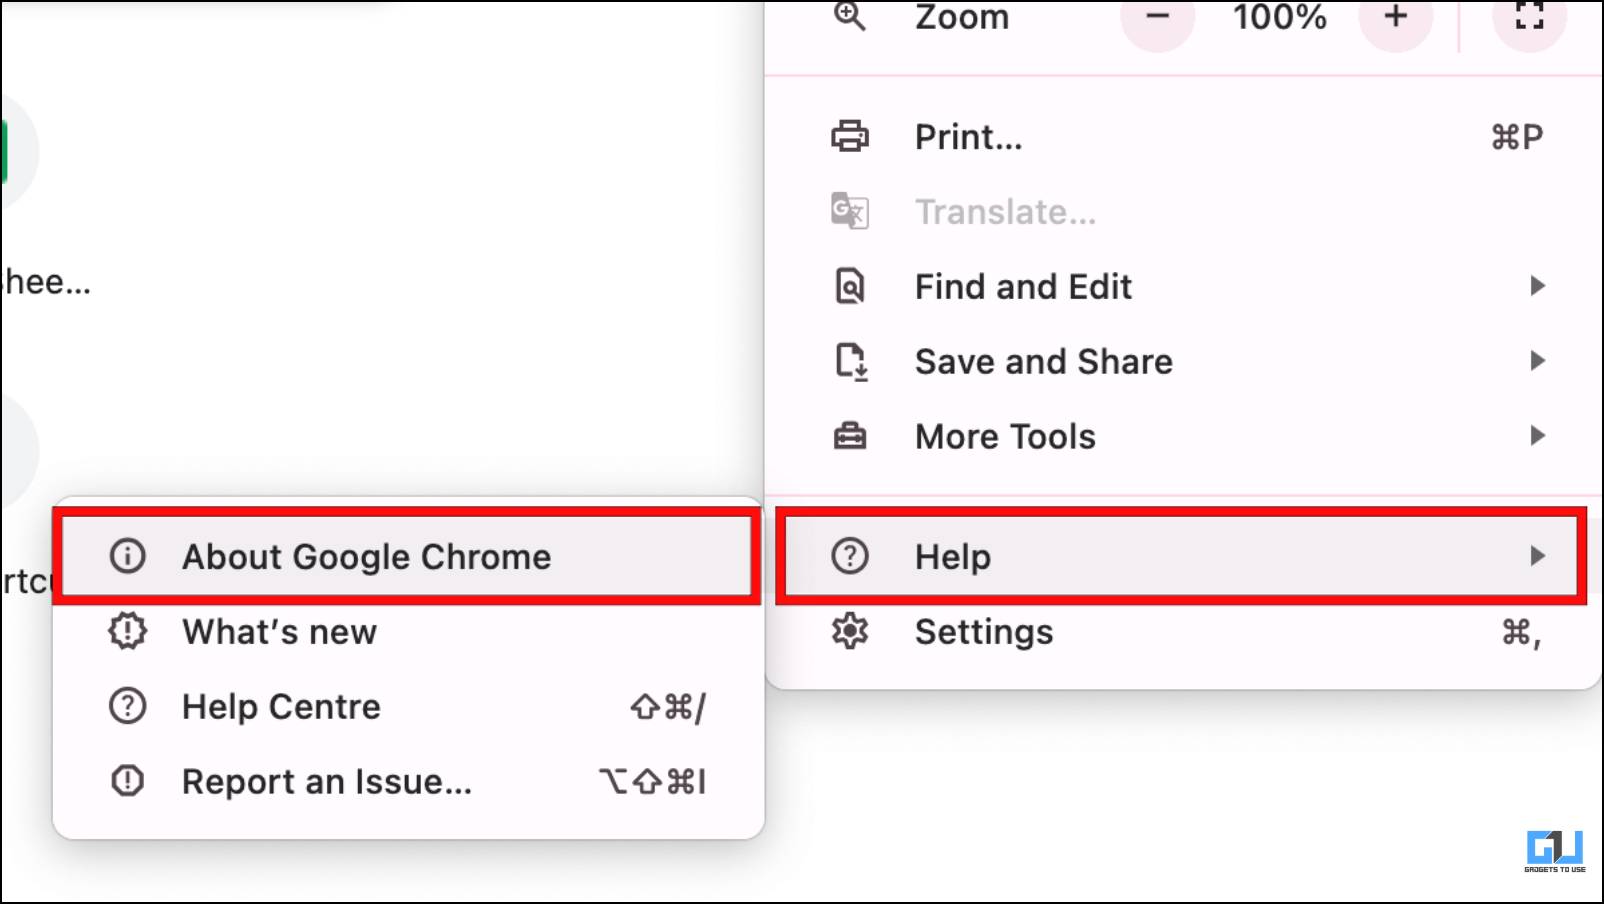 Go to About Chrome from the Help Options in Google Chrome